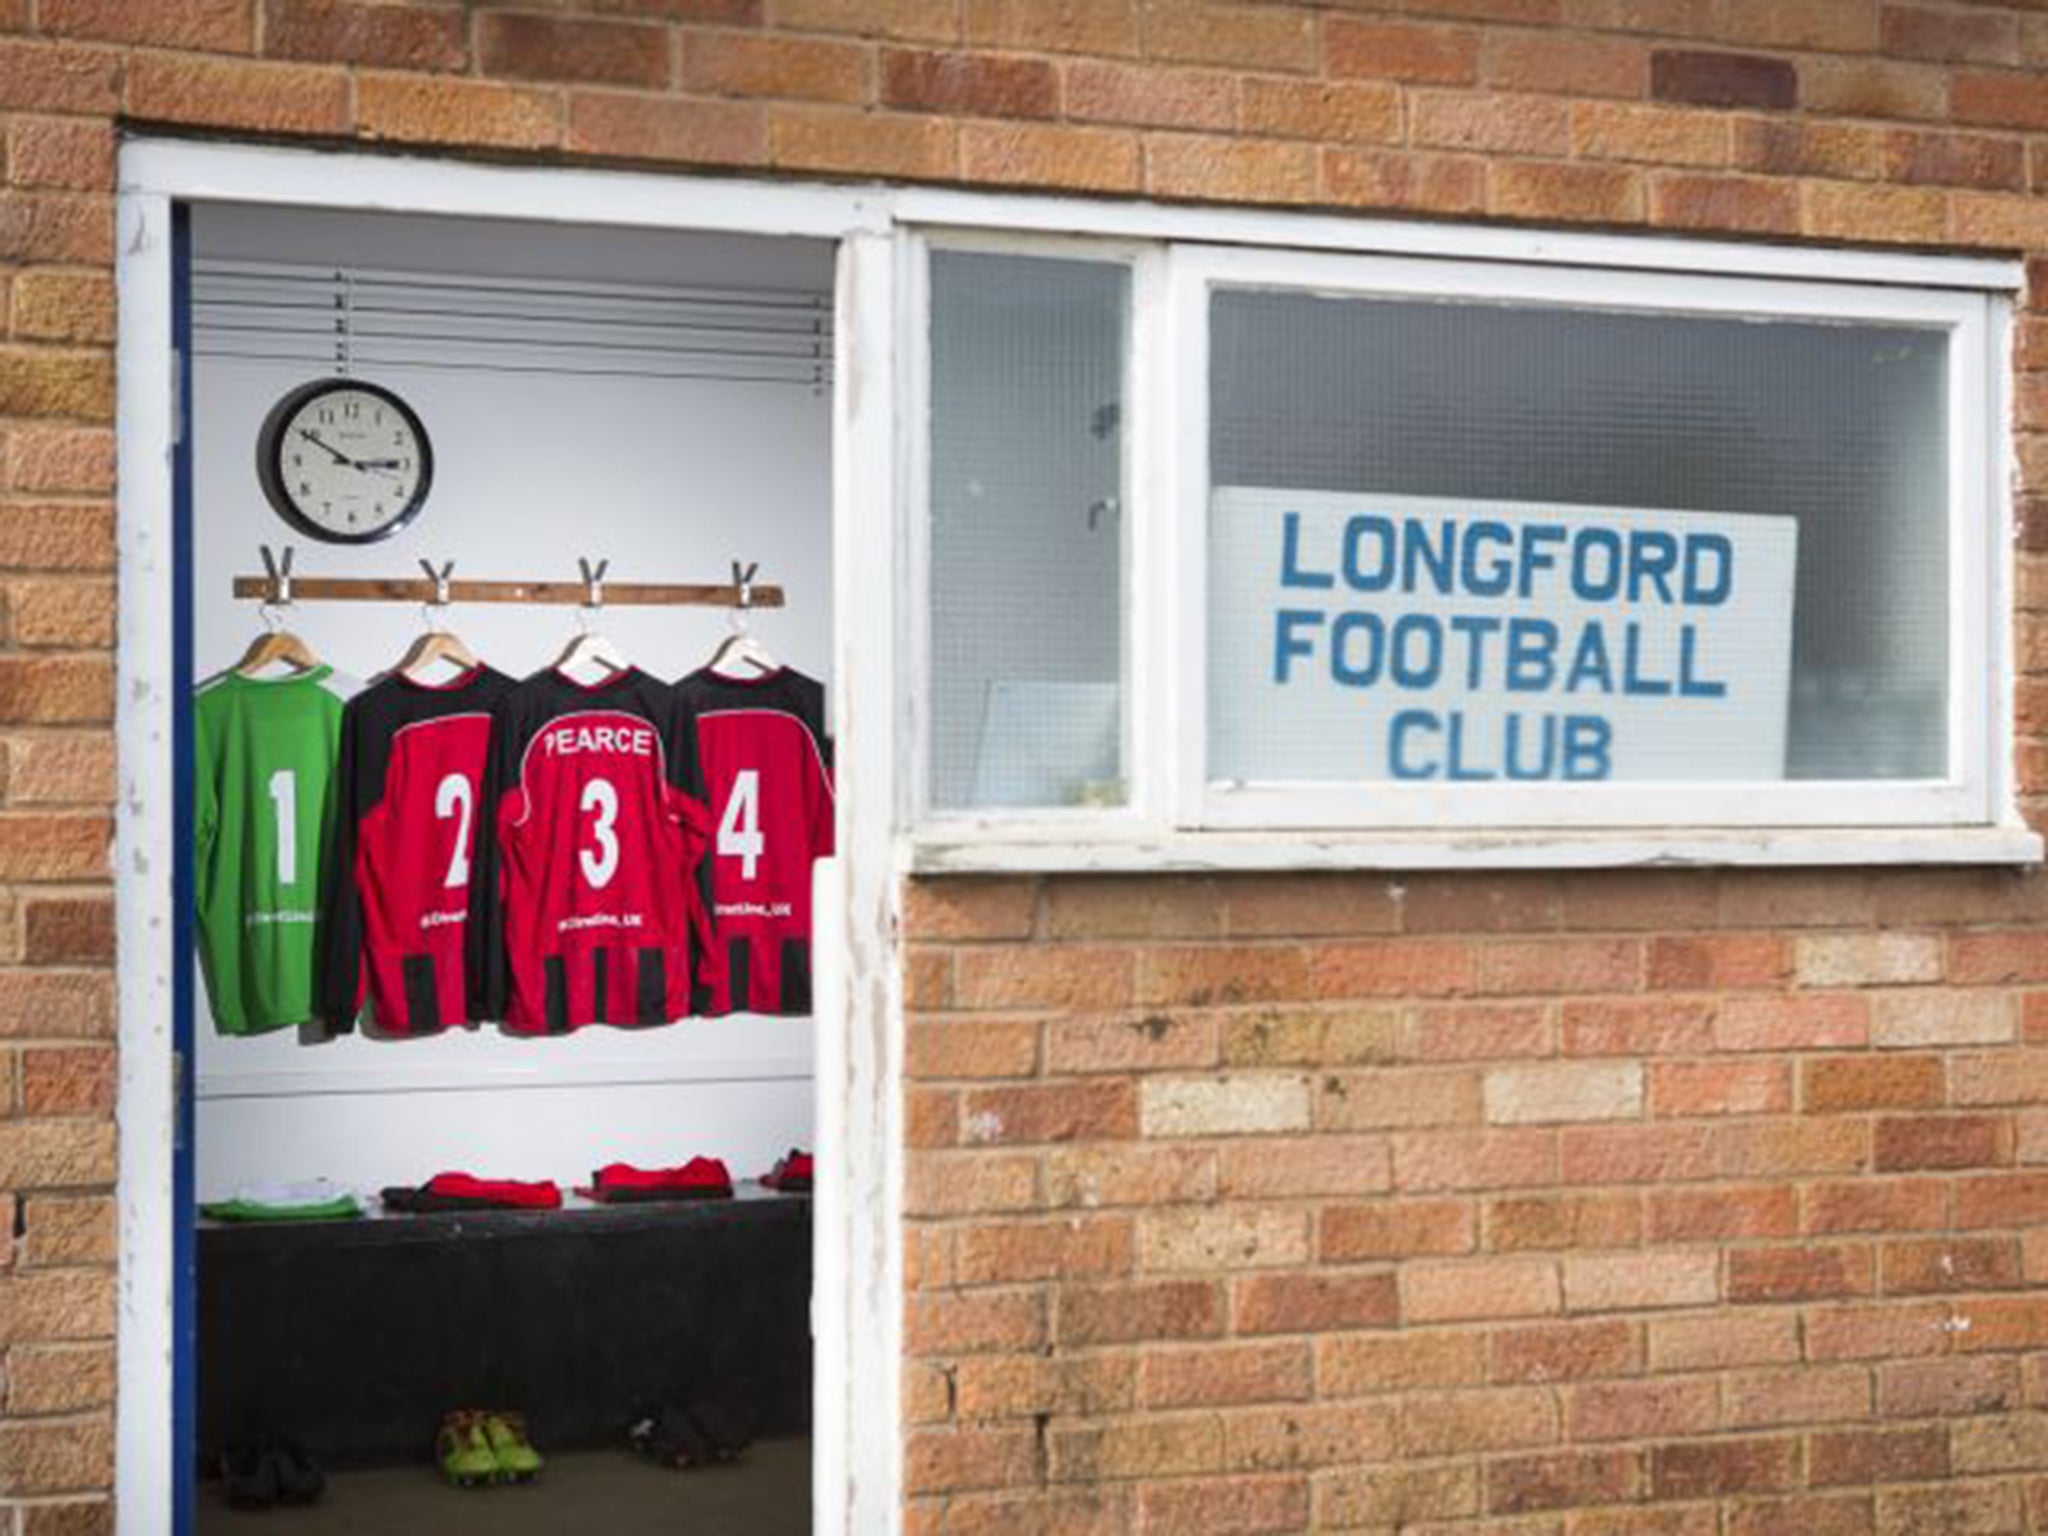 &#13;
Longford FC have been mocked as being “the worst team in Britain” &#13;